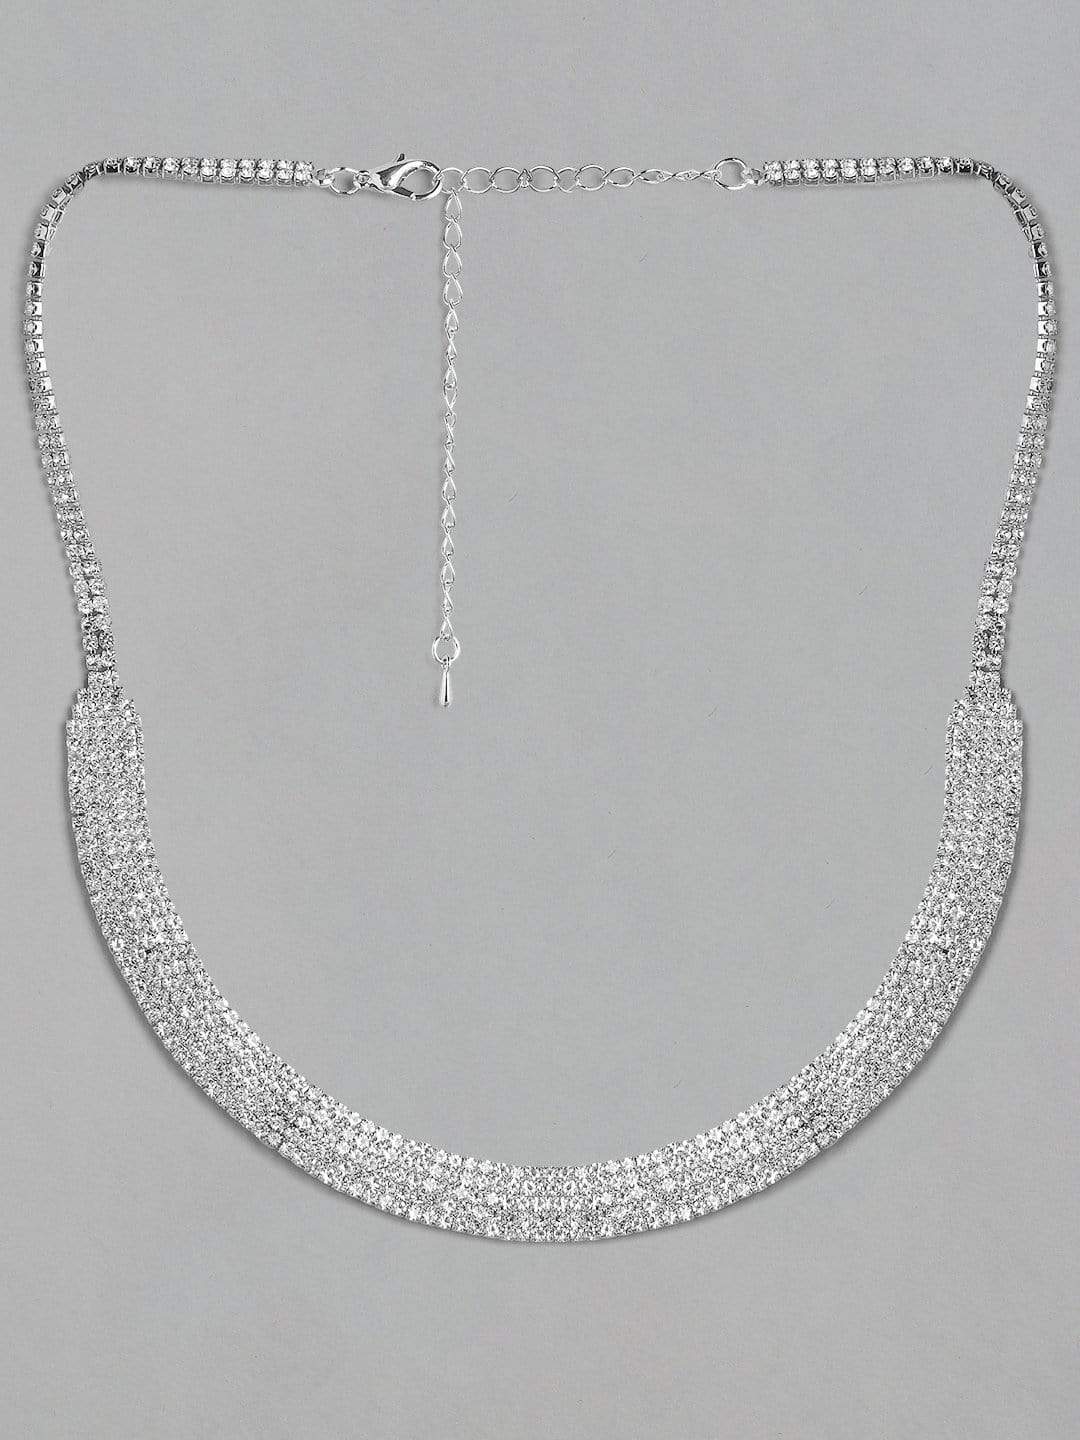 Rubans Silver Toned Handcrafted Rhinestone Necklace Chain & Necklaces